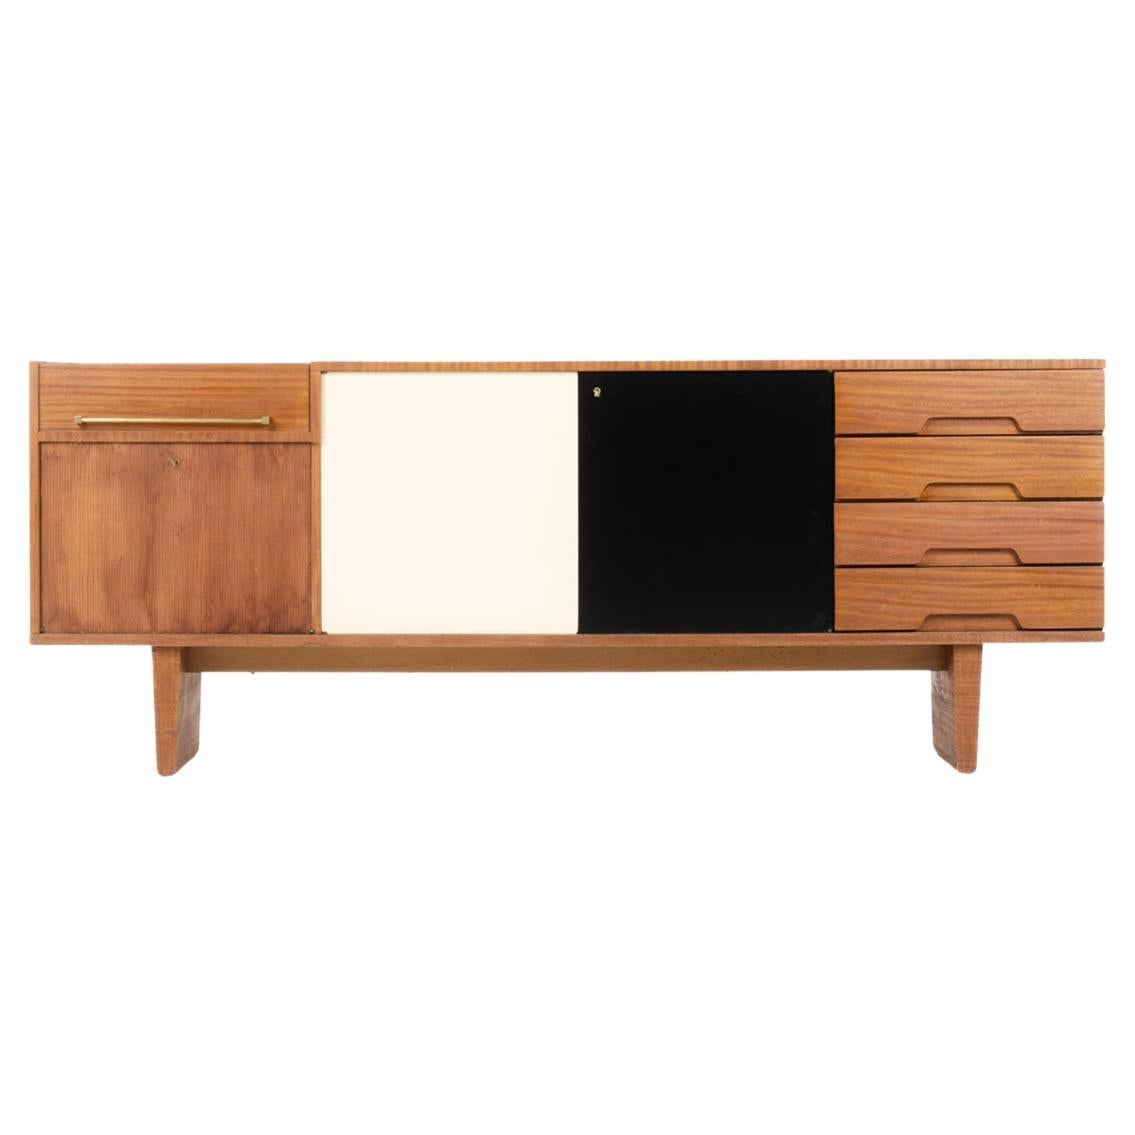 Sideboard by Robert Debieve for Les Huchers Minvielle, 1950s For Sale